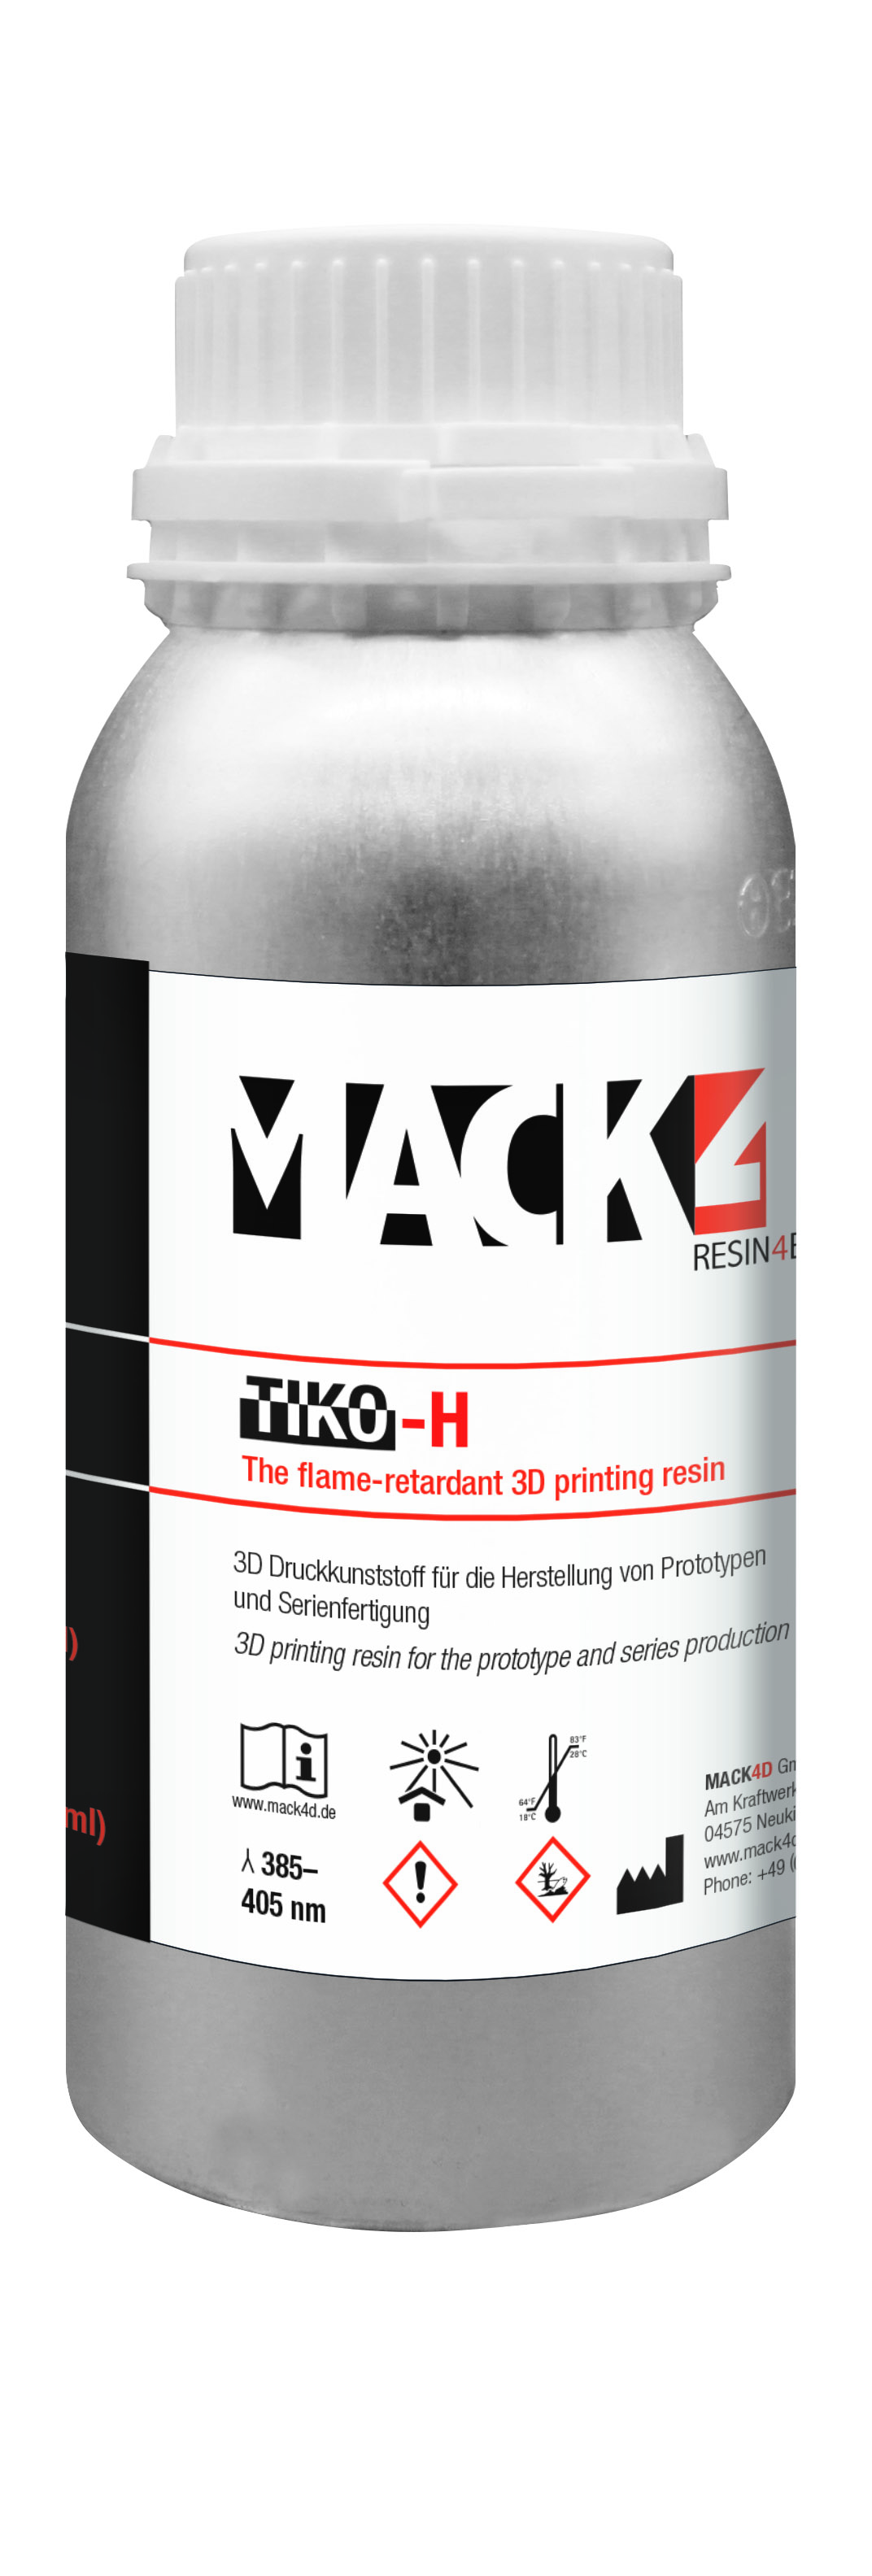 TIKO-H the heat resistant resin for DLP, LCD and SLA 3D Printing